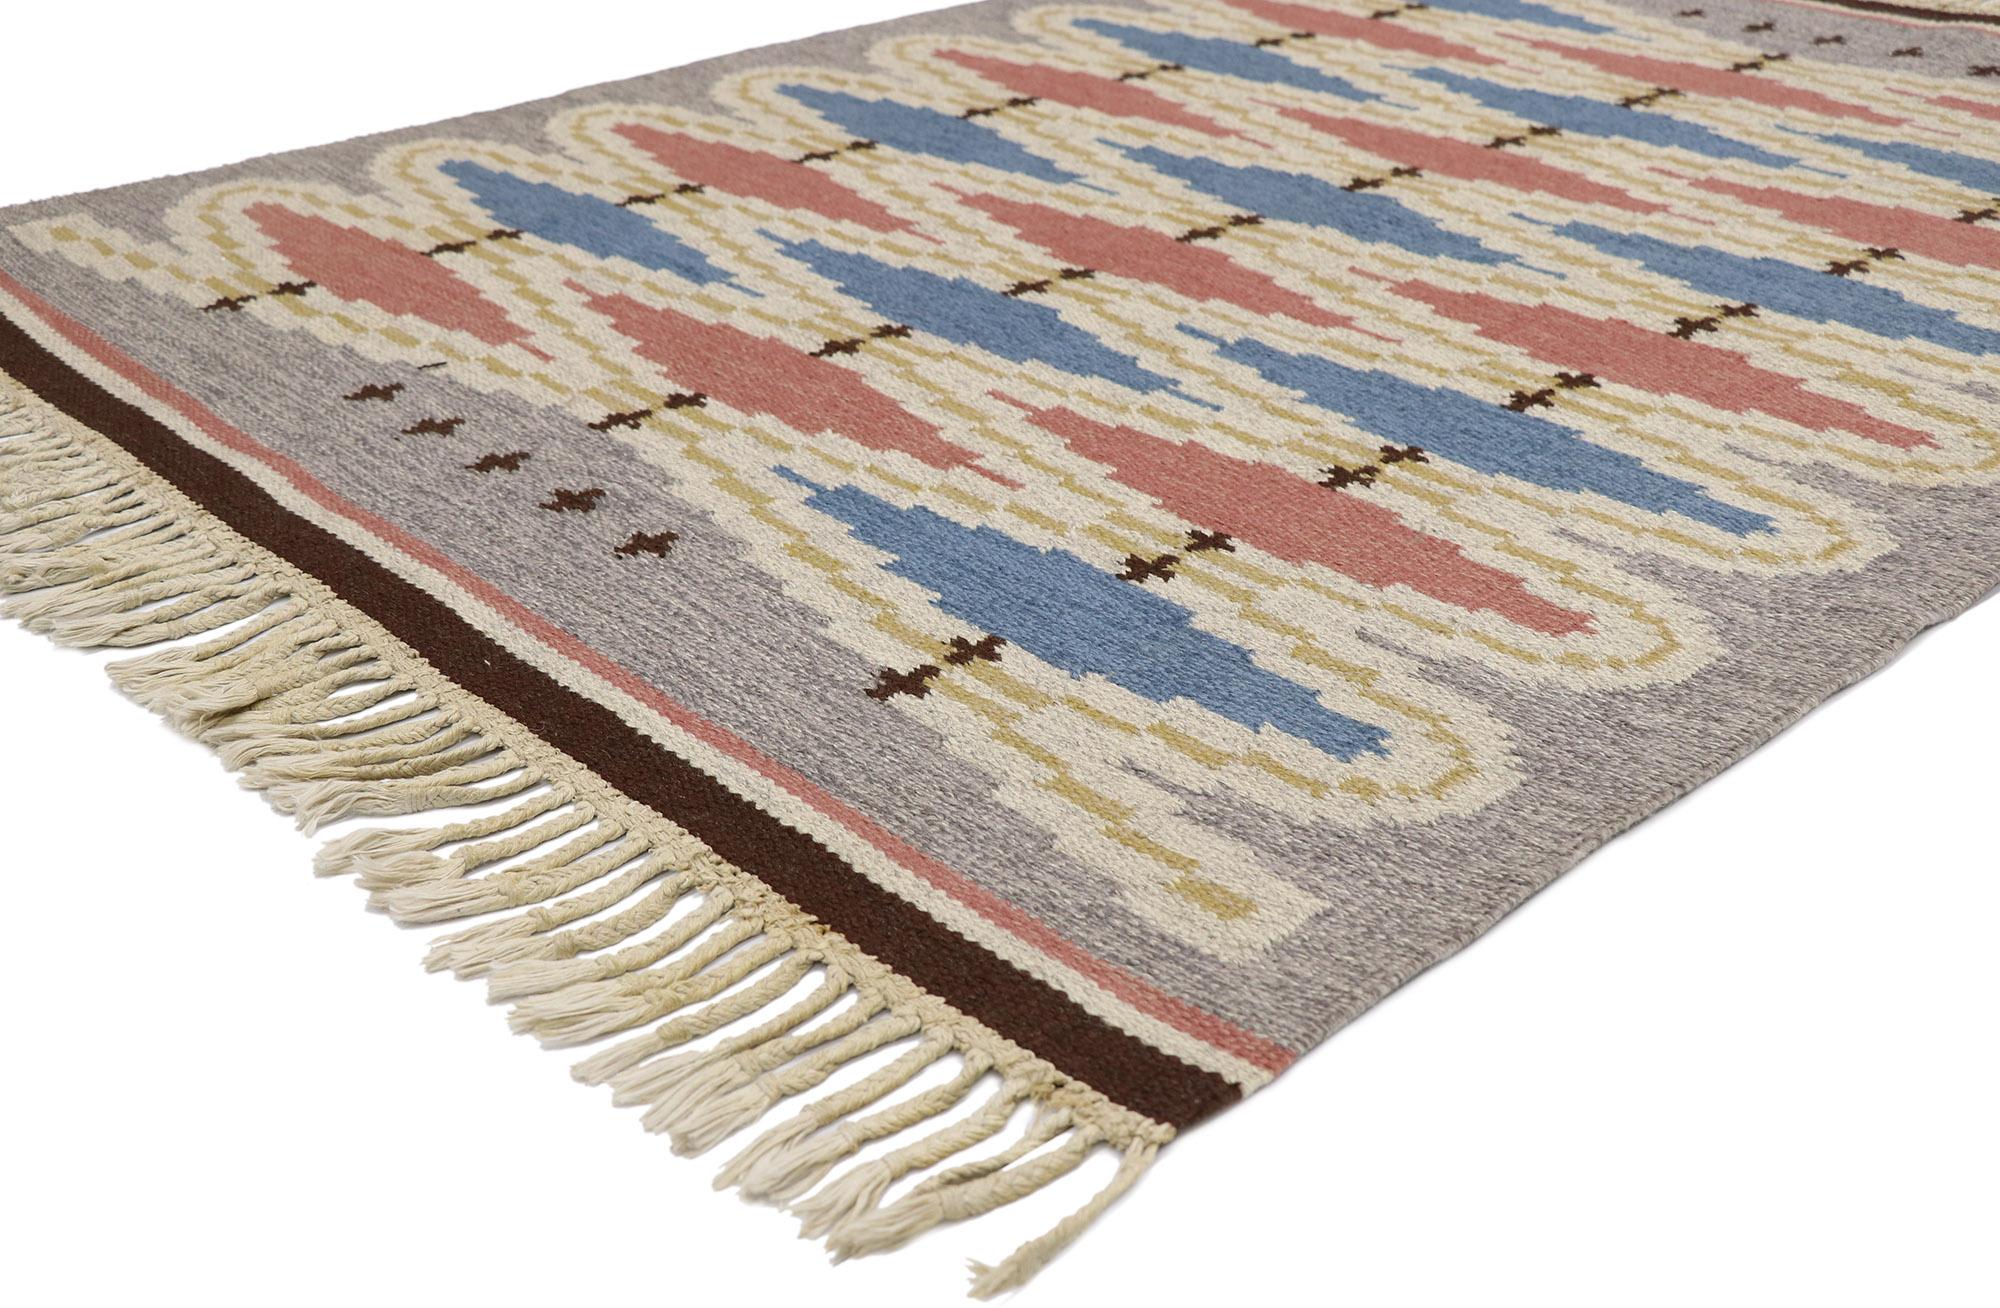 ?78108, vintage Swedish Rollakan Kilim rug with Scandinavian Modern style. ??With its geometric design and bohemian hygge vibes, this hand-woven wool Swedish Kilim rug beautifully embodies the simplicity of Scandinavian modern style. The abrashed